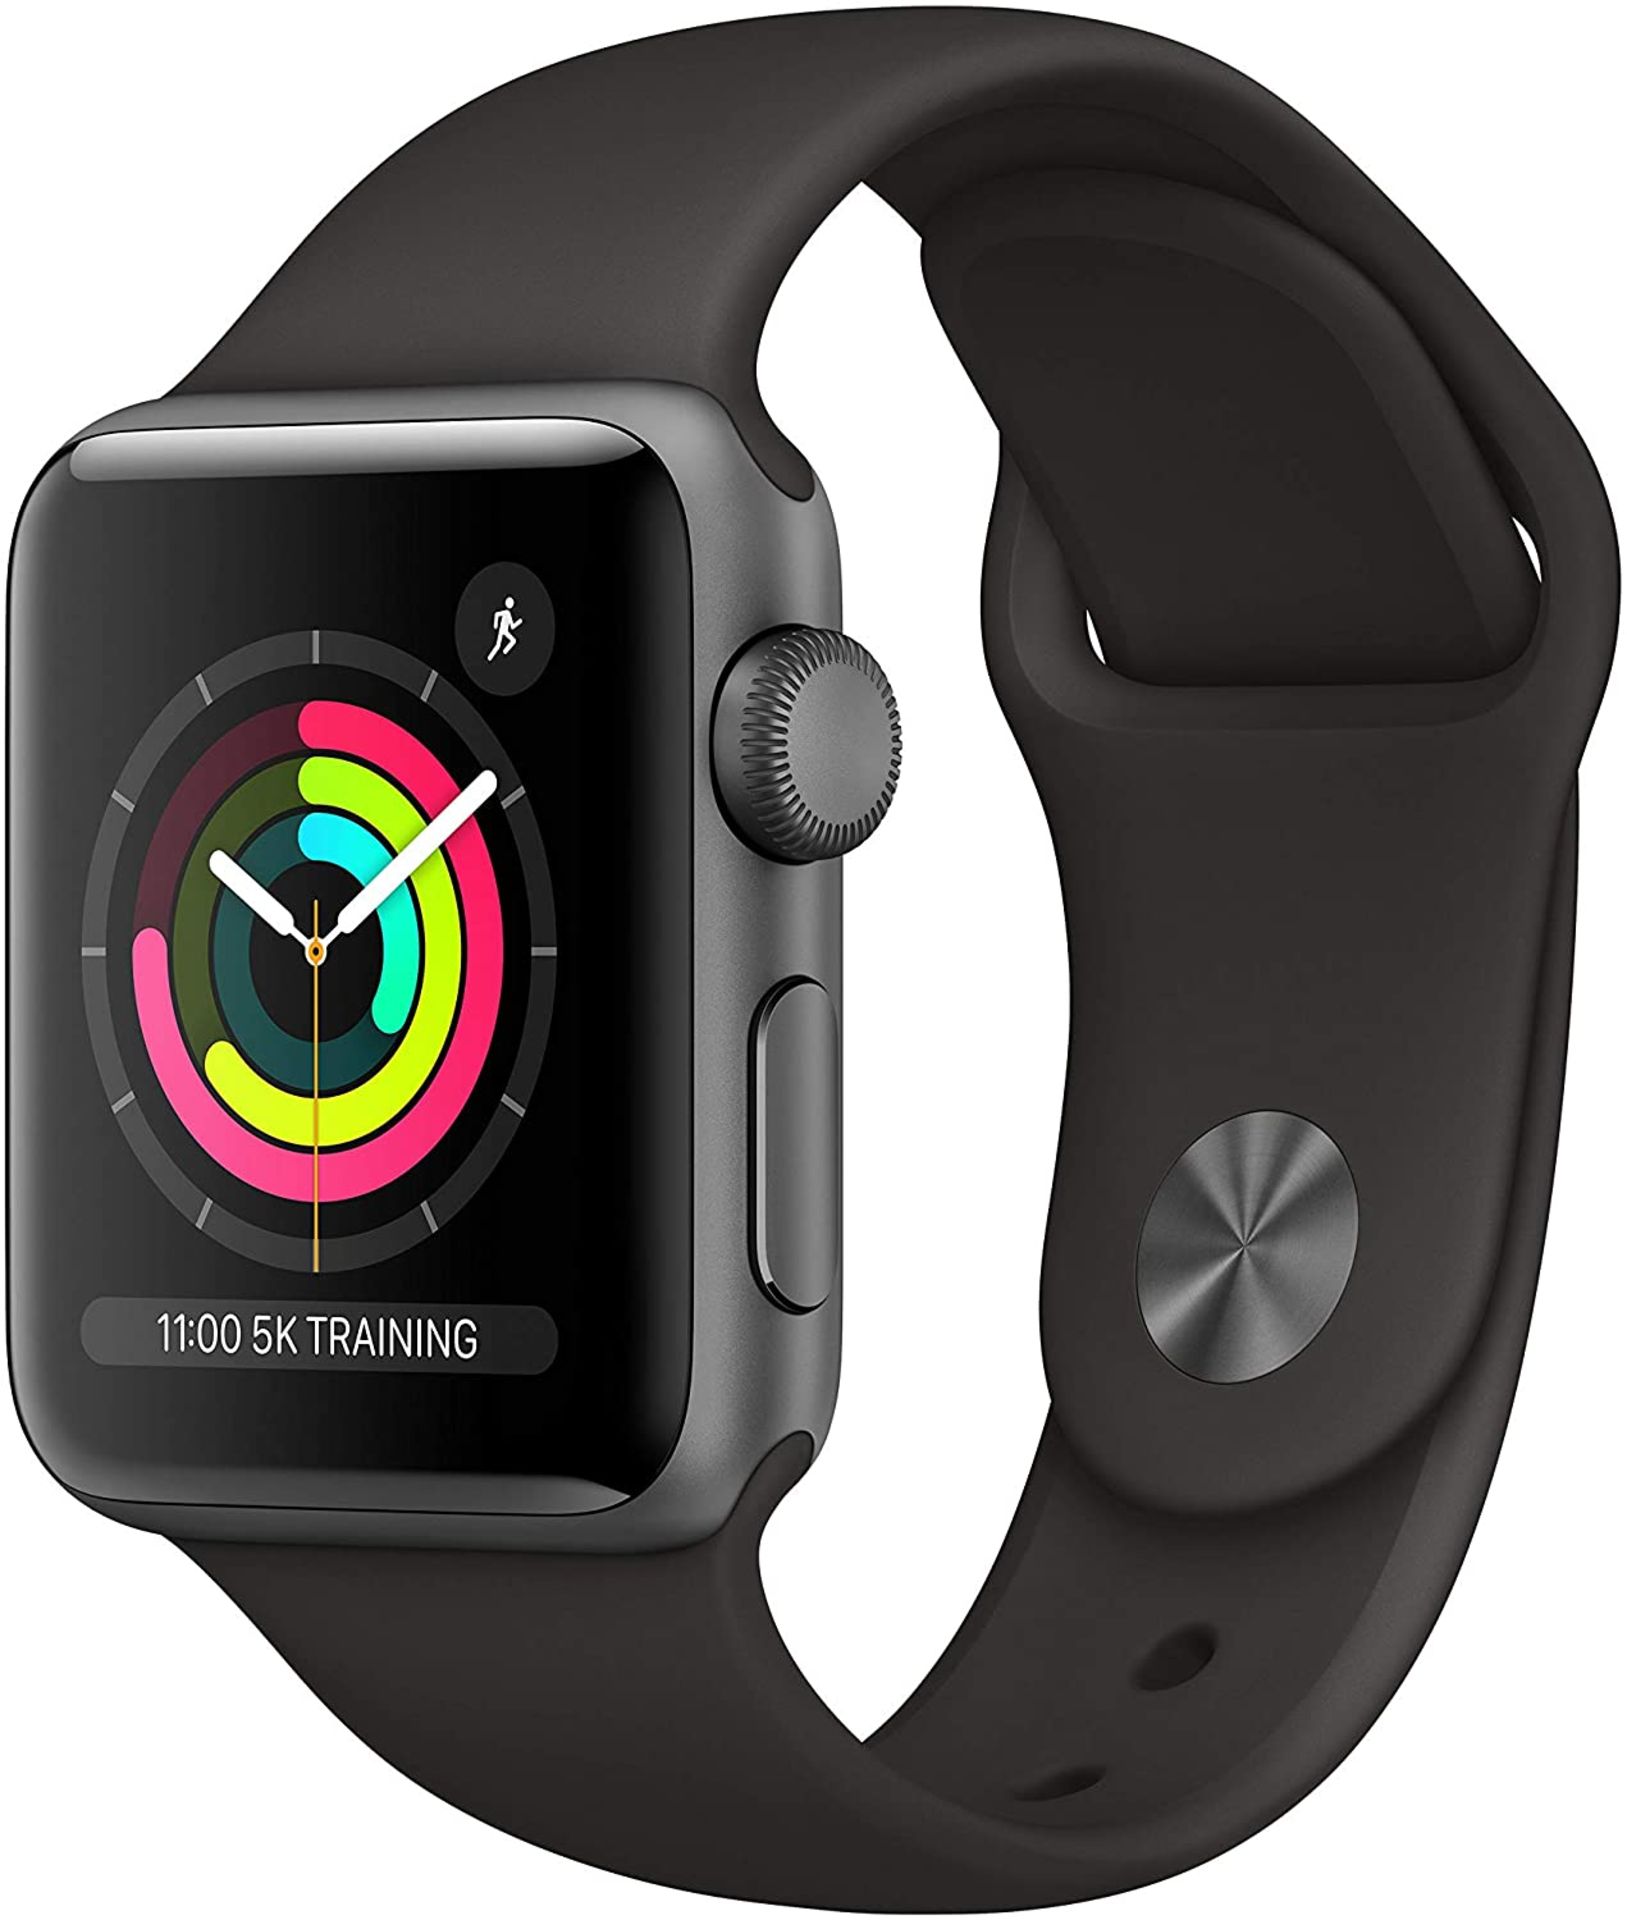 RRP £208.00 Apple Watch Series 3 (GPS, 42mm) - Space Grey Aluminum Case with Black Sport Band